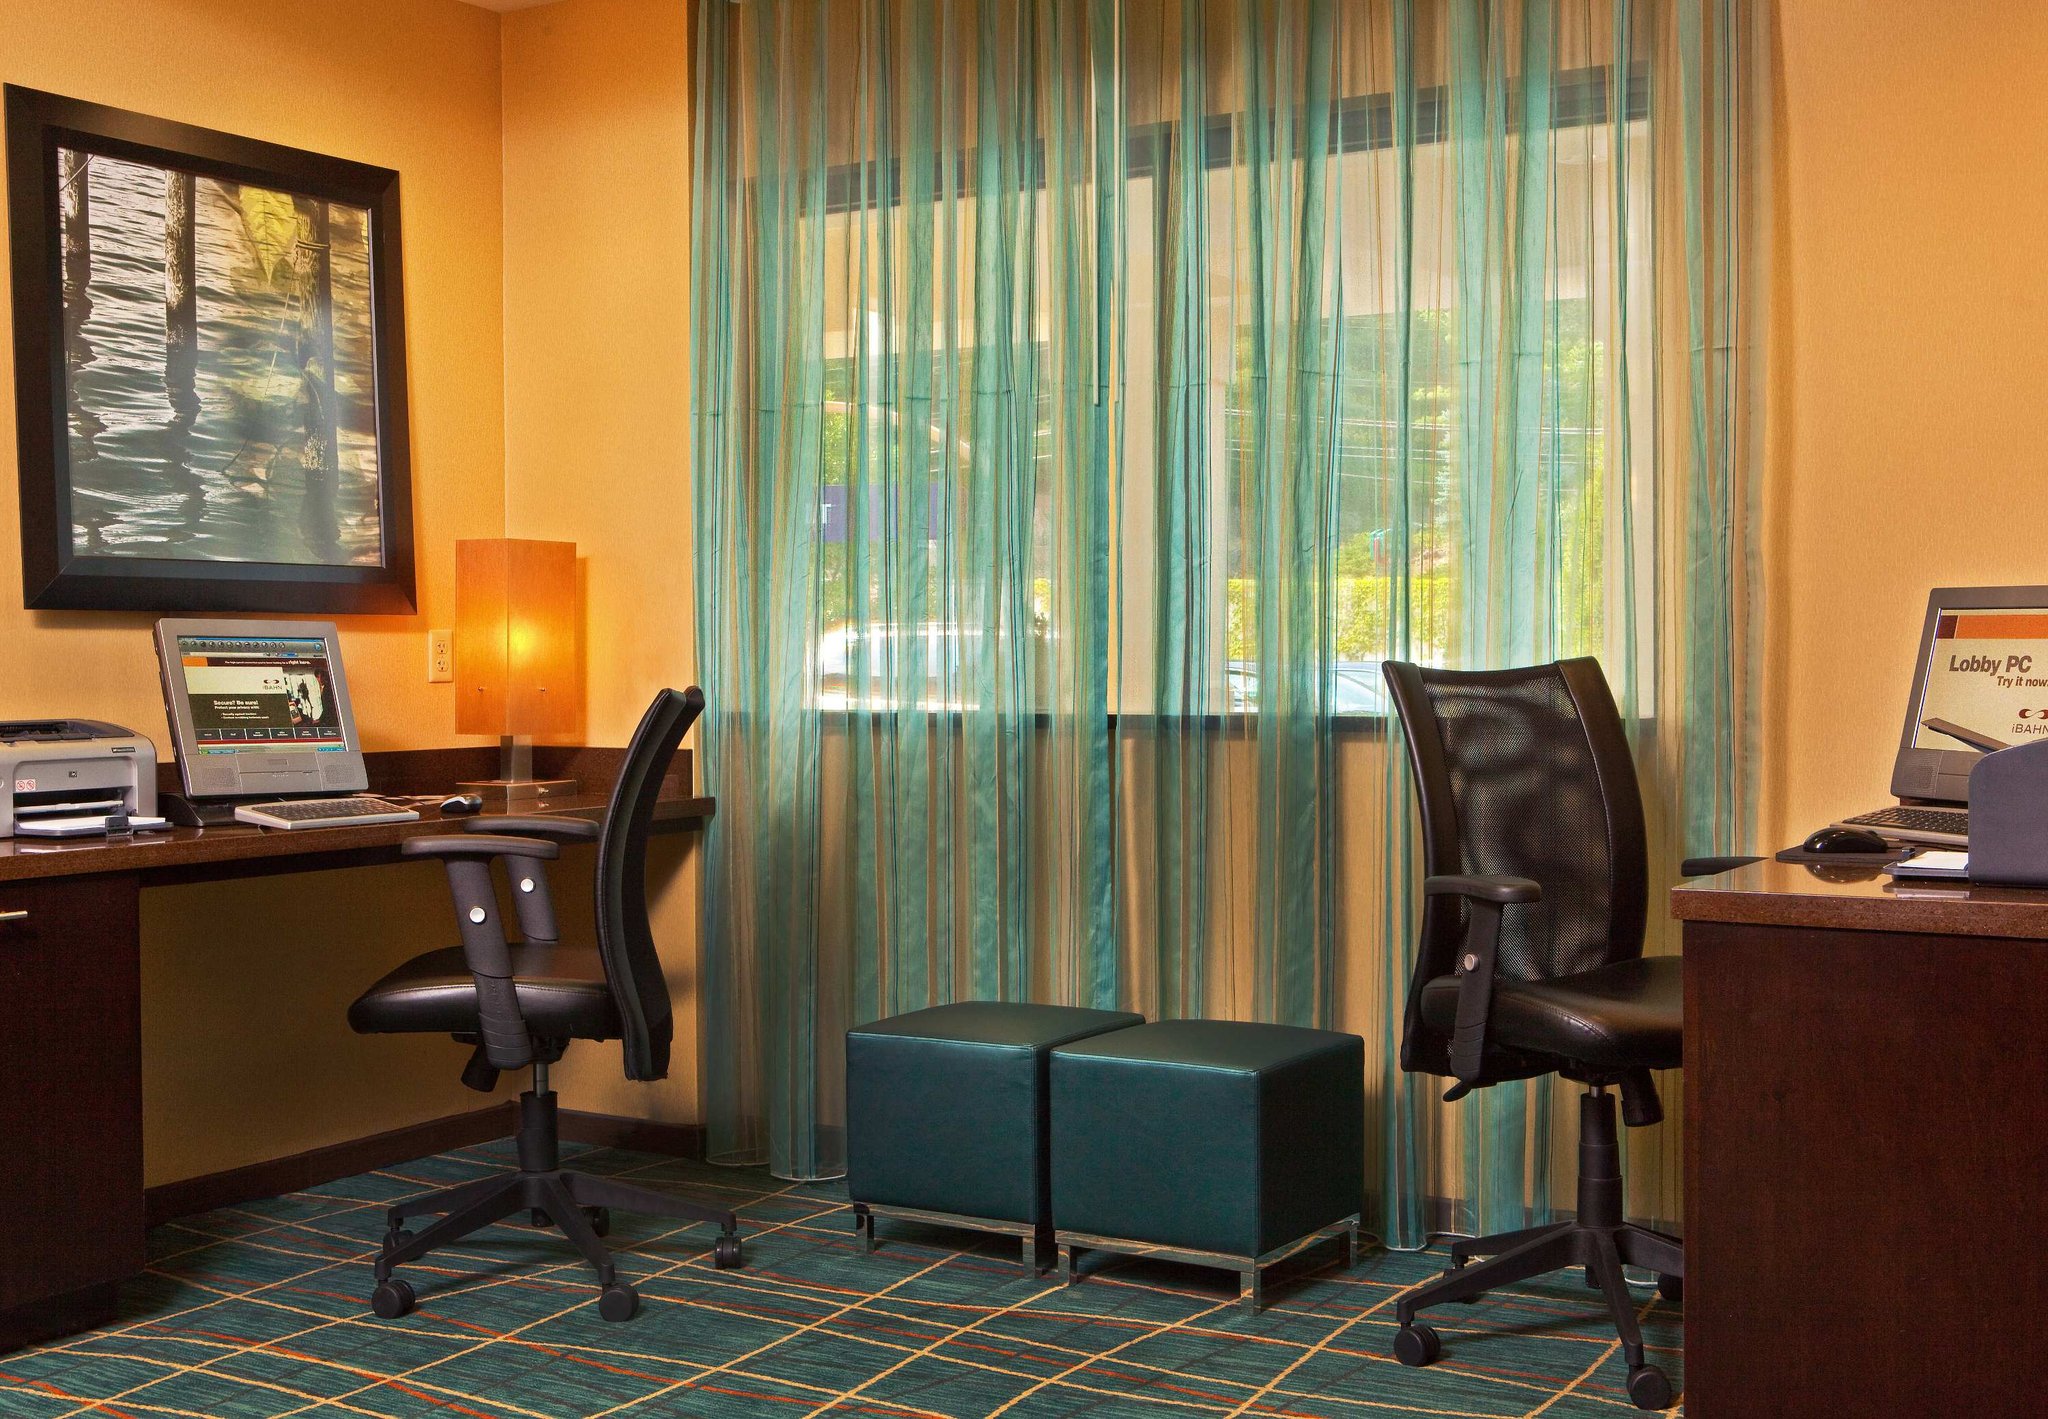 SpringHill Suites by Marriott Tarrytown Westchester County